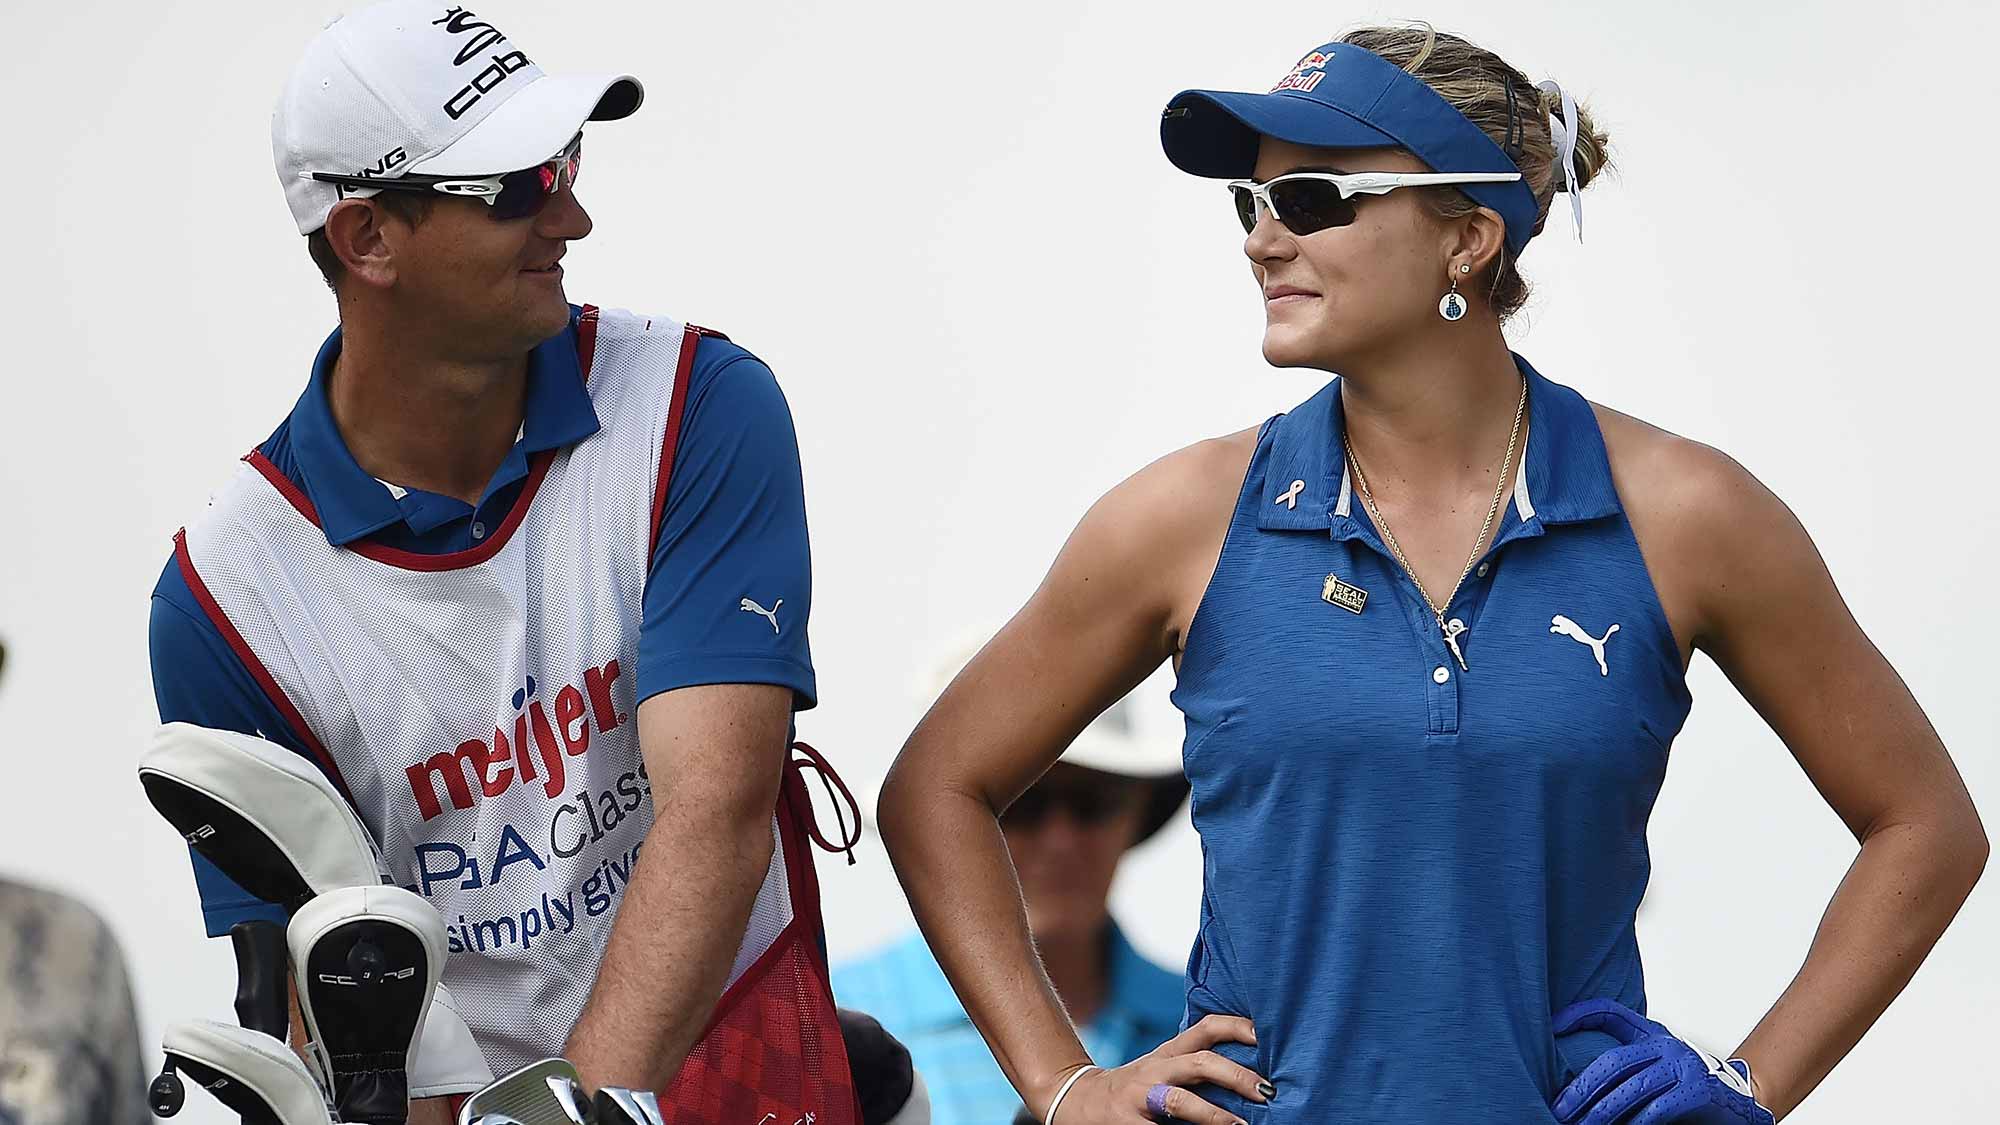 Lexi Thompson speaks with her caddie on the 15th tee during the first round of the Meijer LPGA Classic at Blythefield Country Club